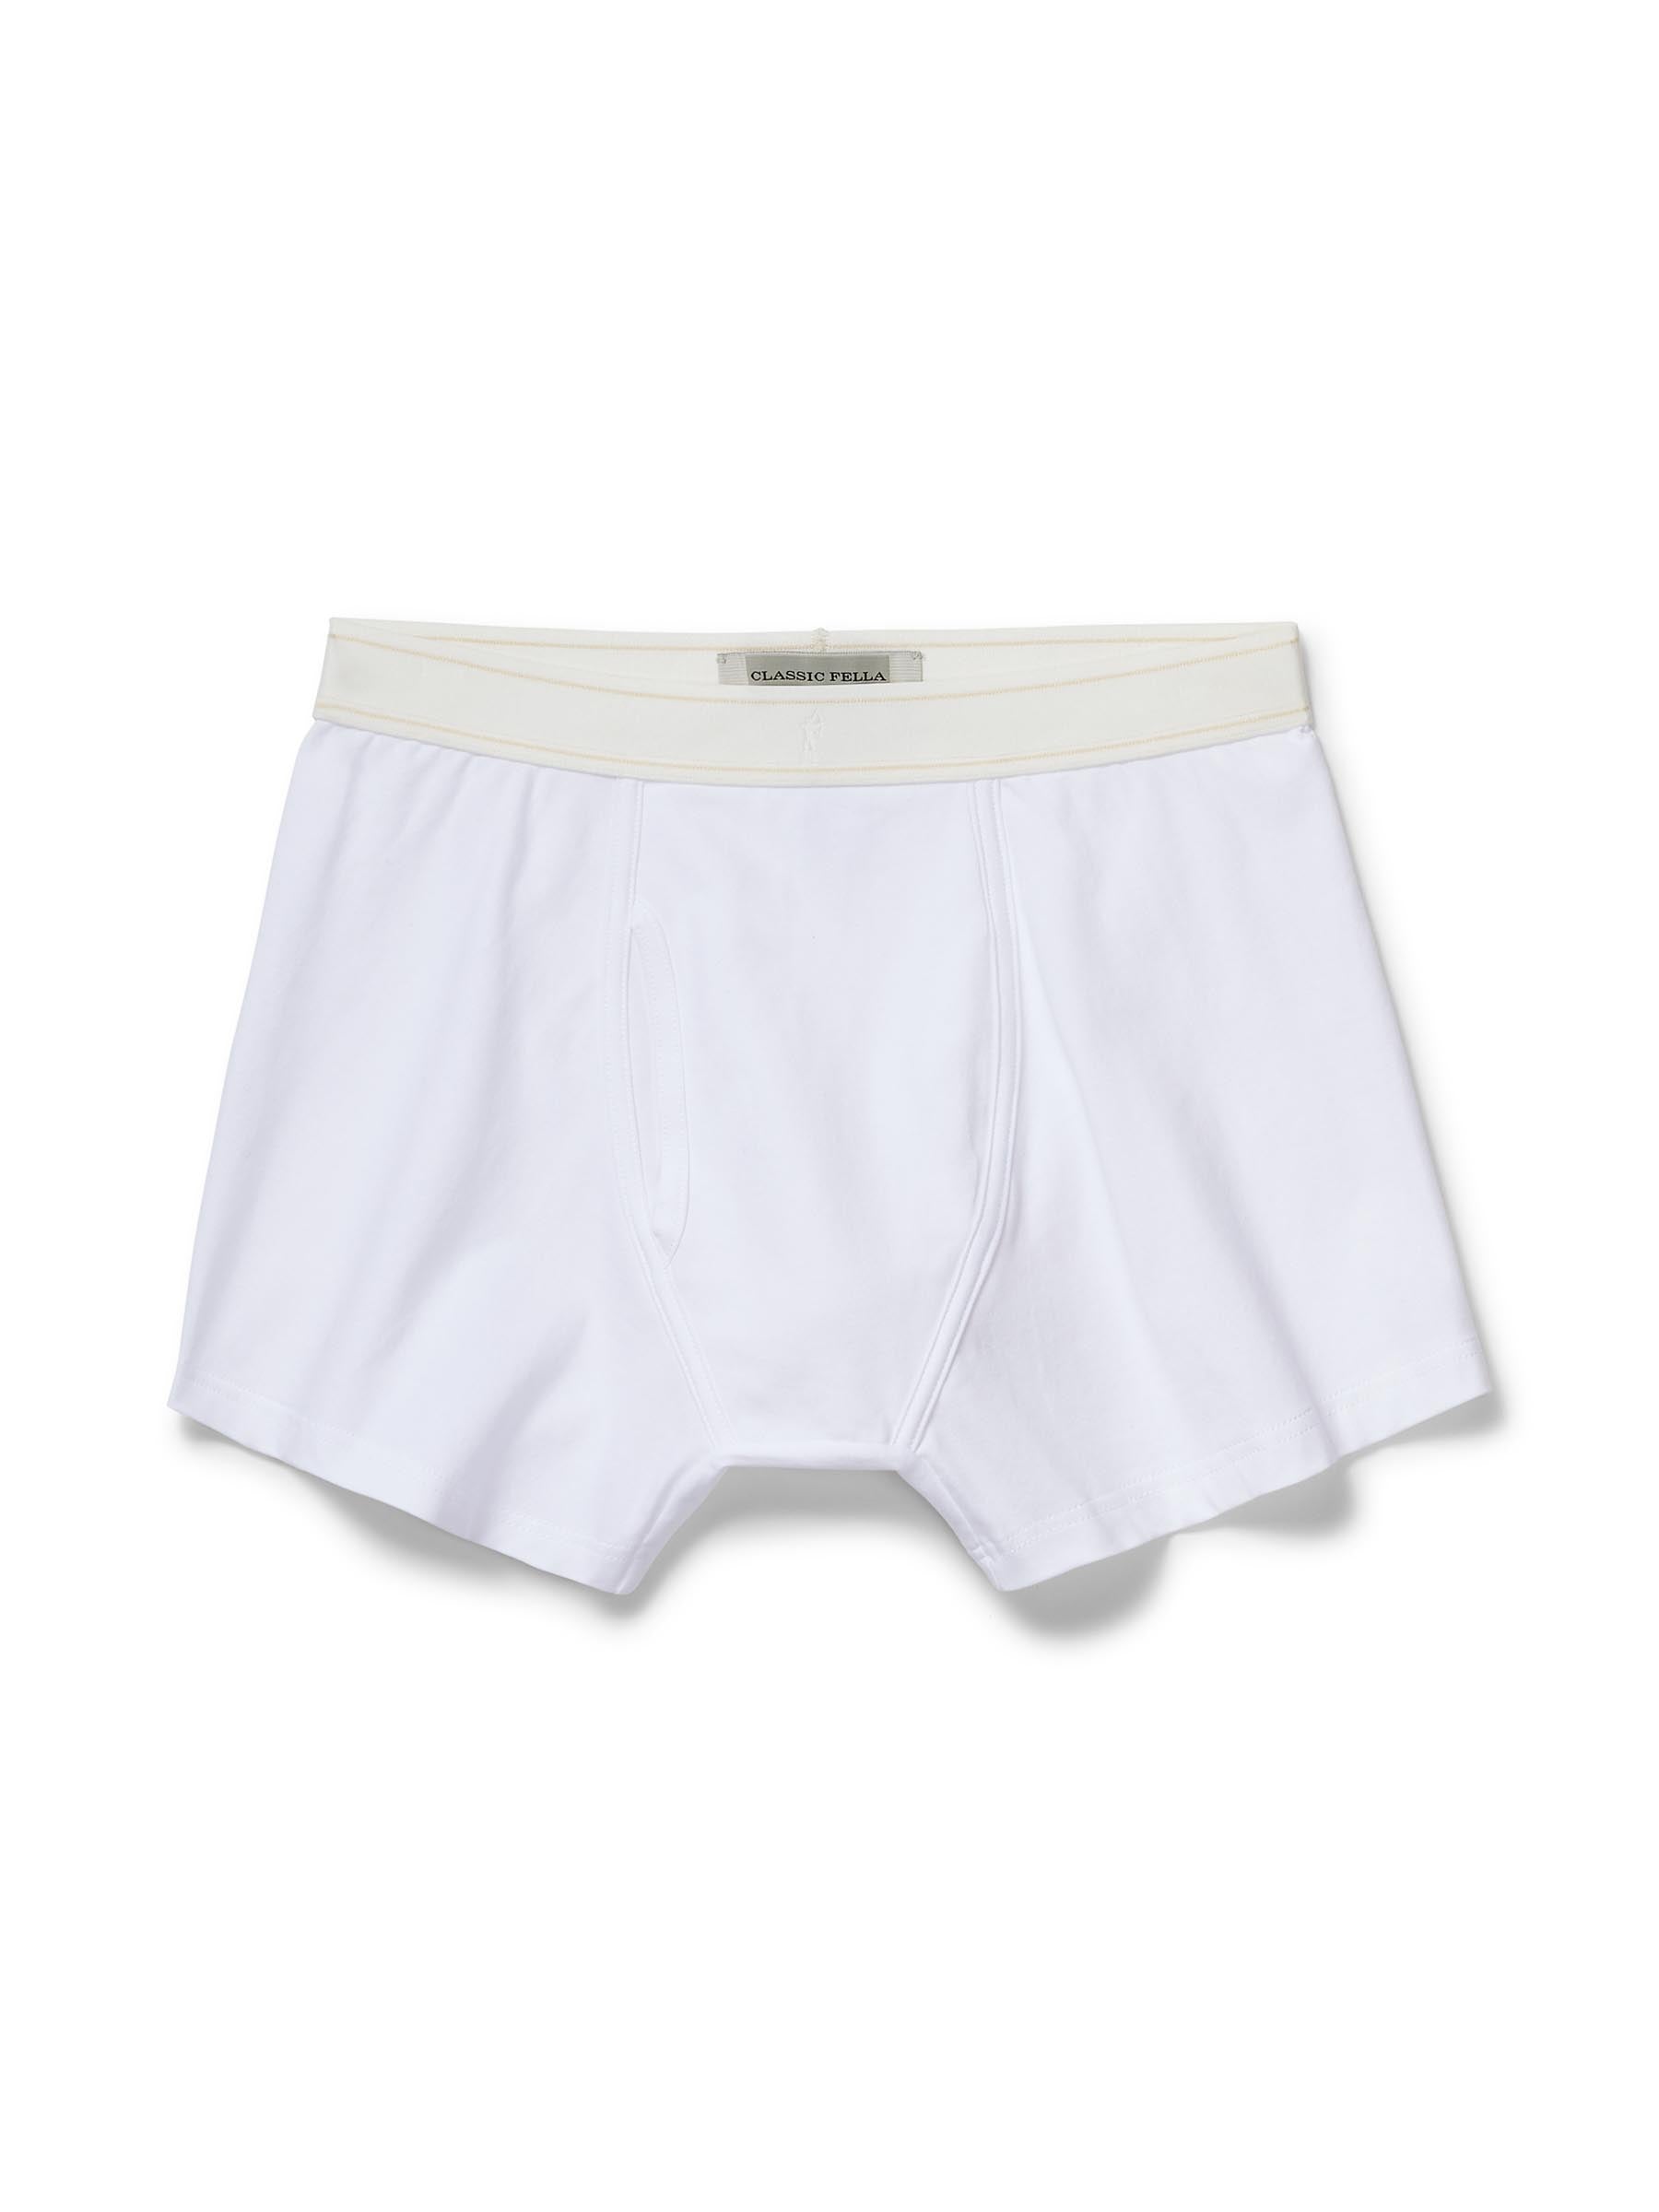 Classic briefs without fly front Serie Noblesse Colour white